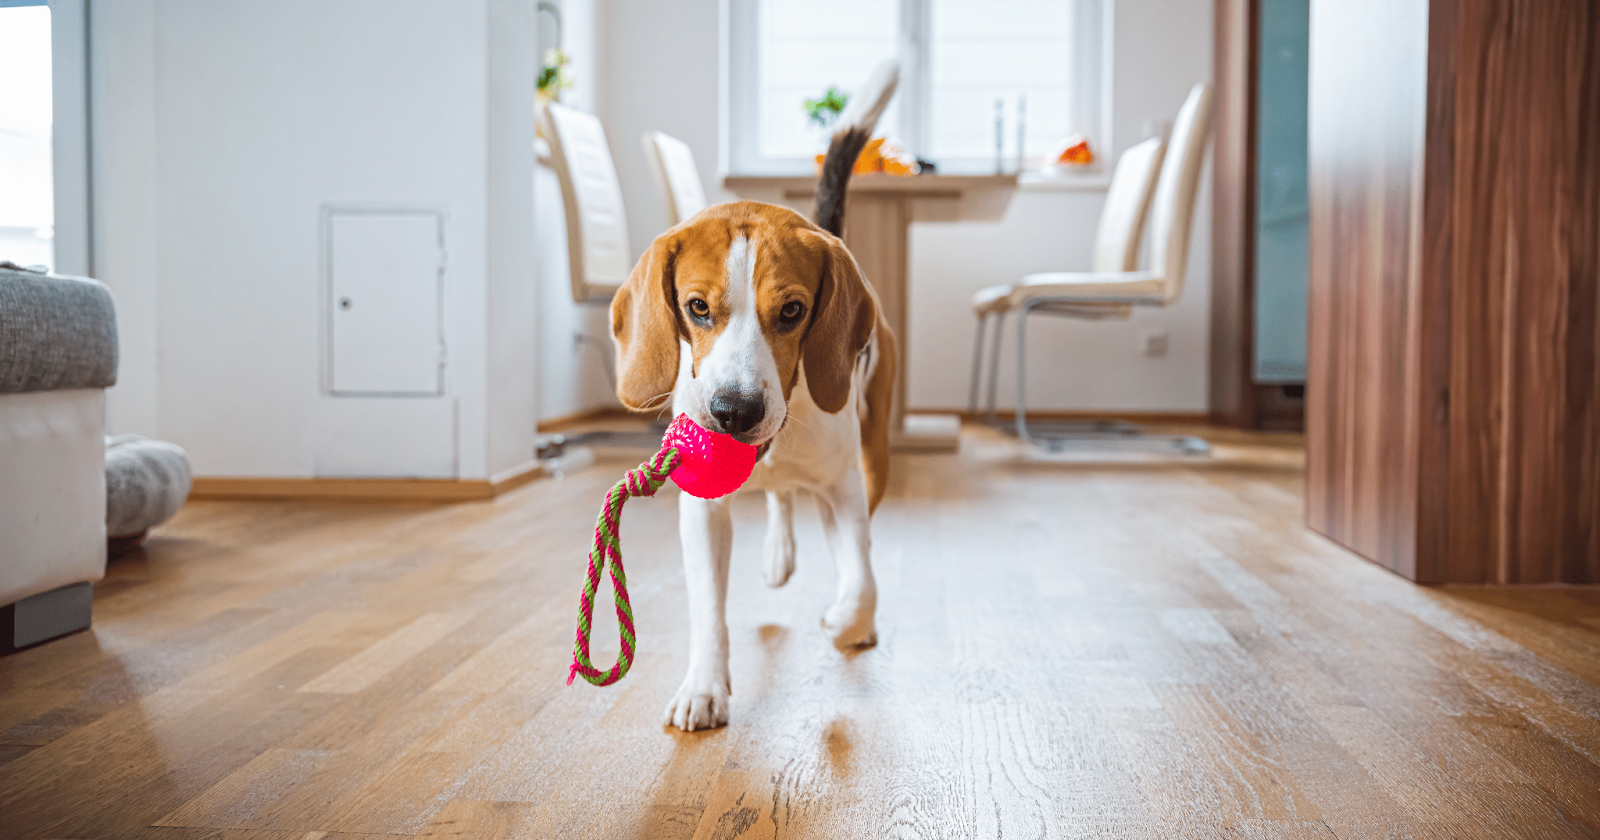 Hound running through house with ball toy in mouth